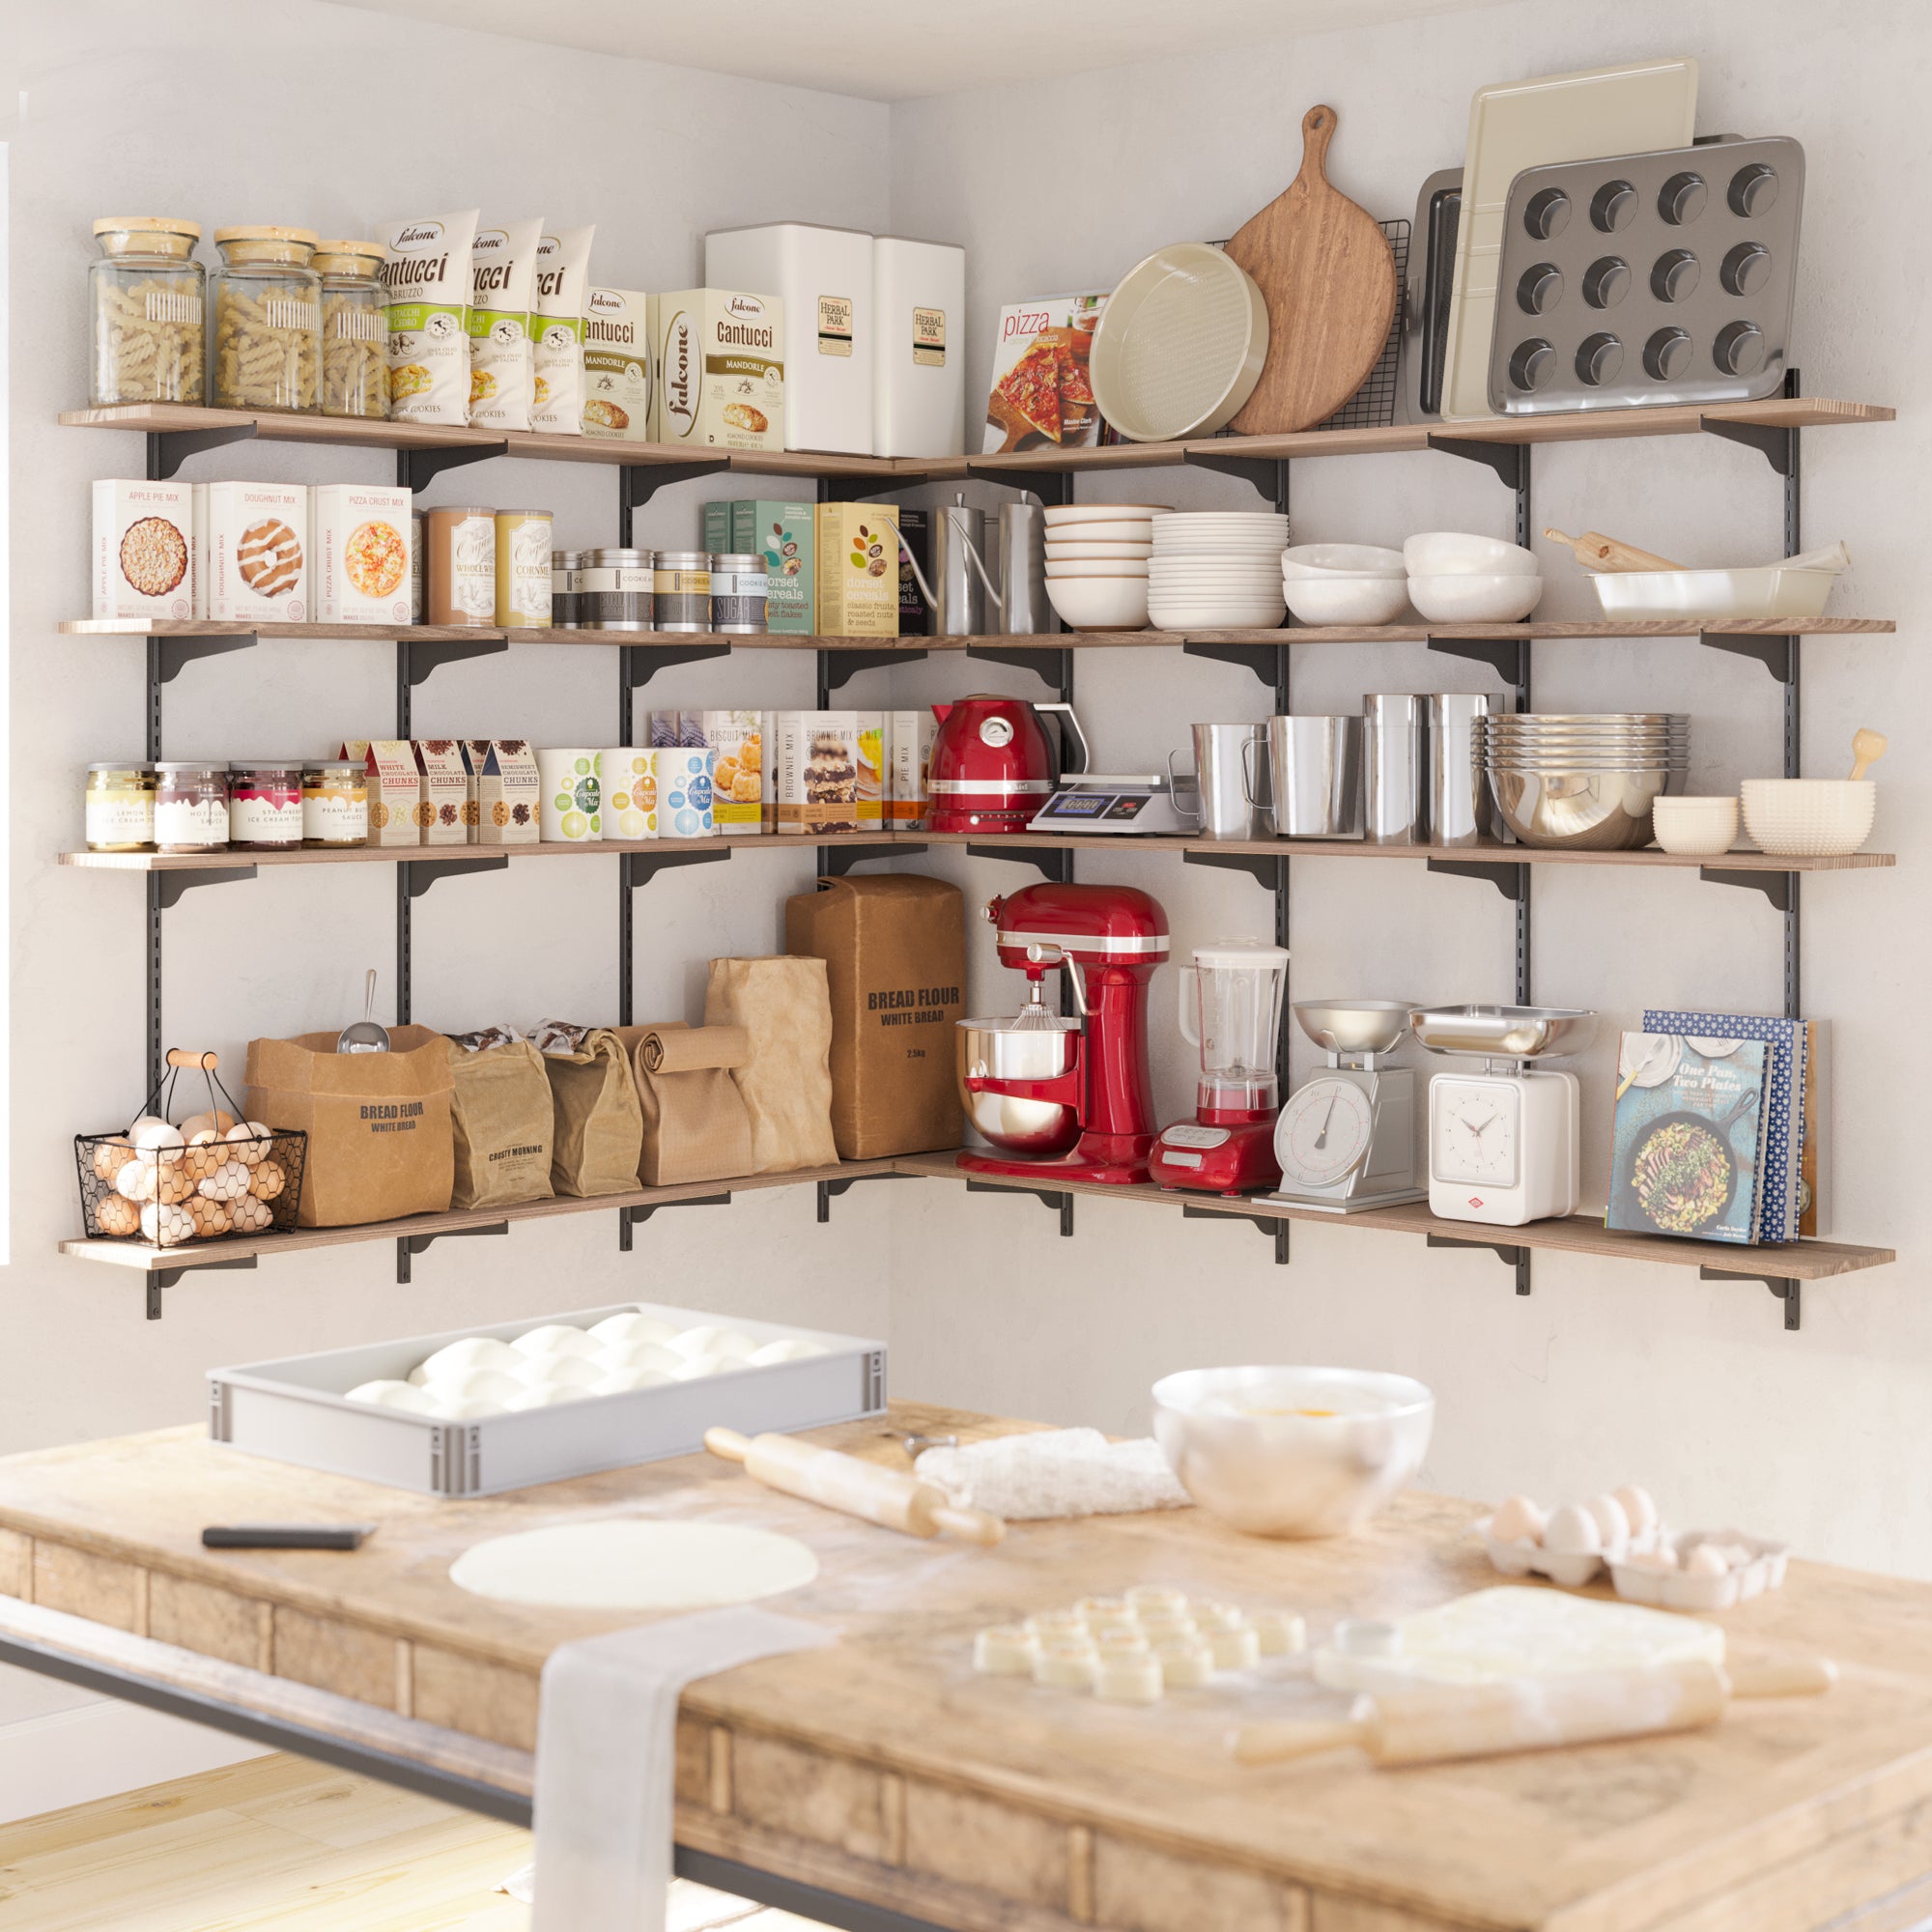 A baking station with organizer shelves burnt stocked with baking ingredients, utensils, and equipment, showcasing a functional and inviting kitchen workspace.